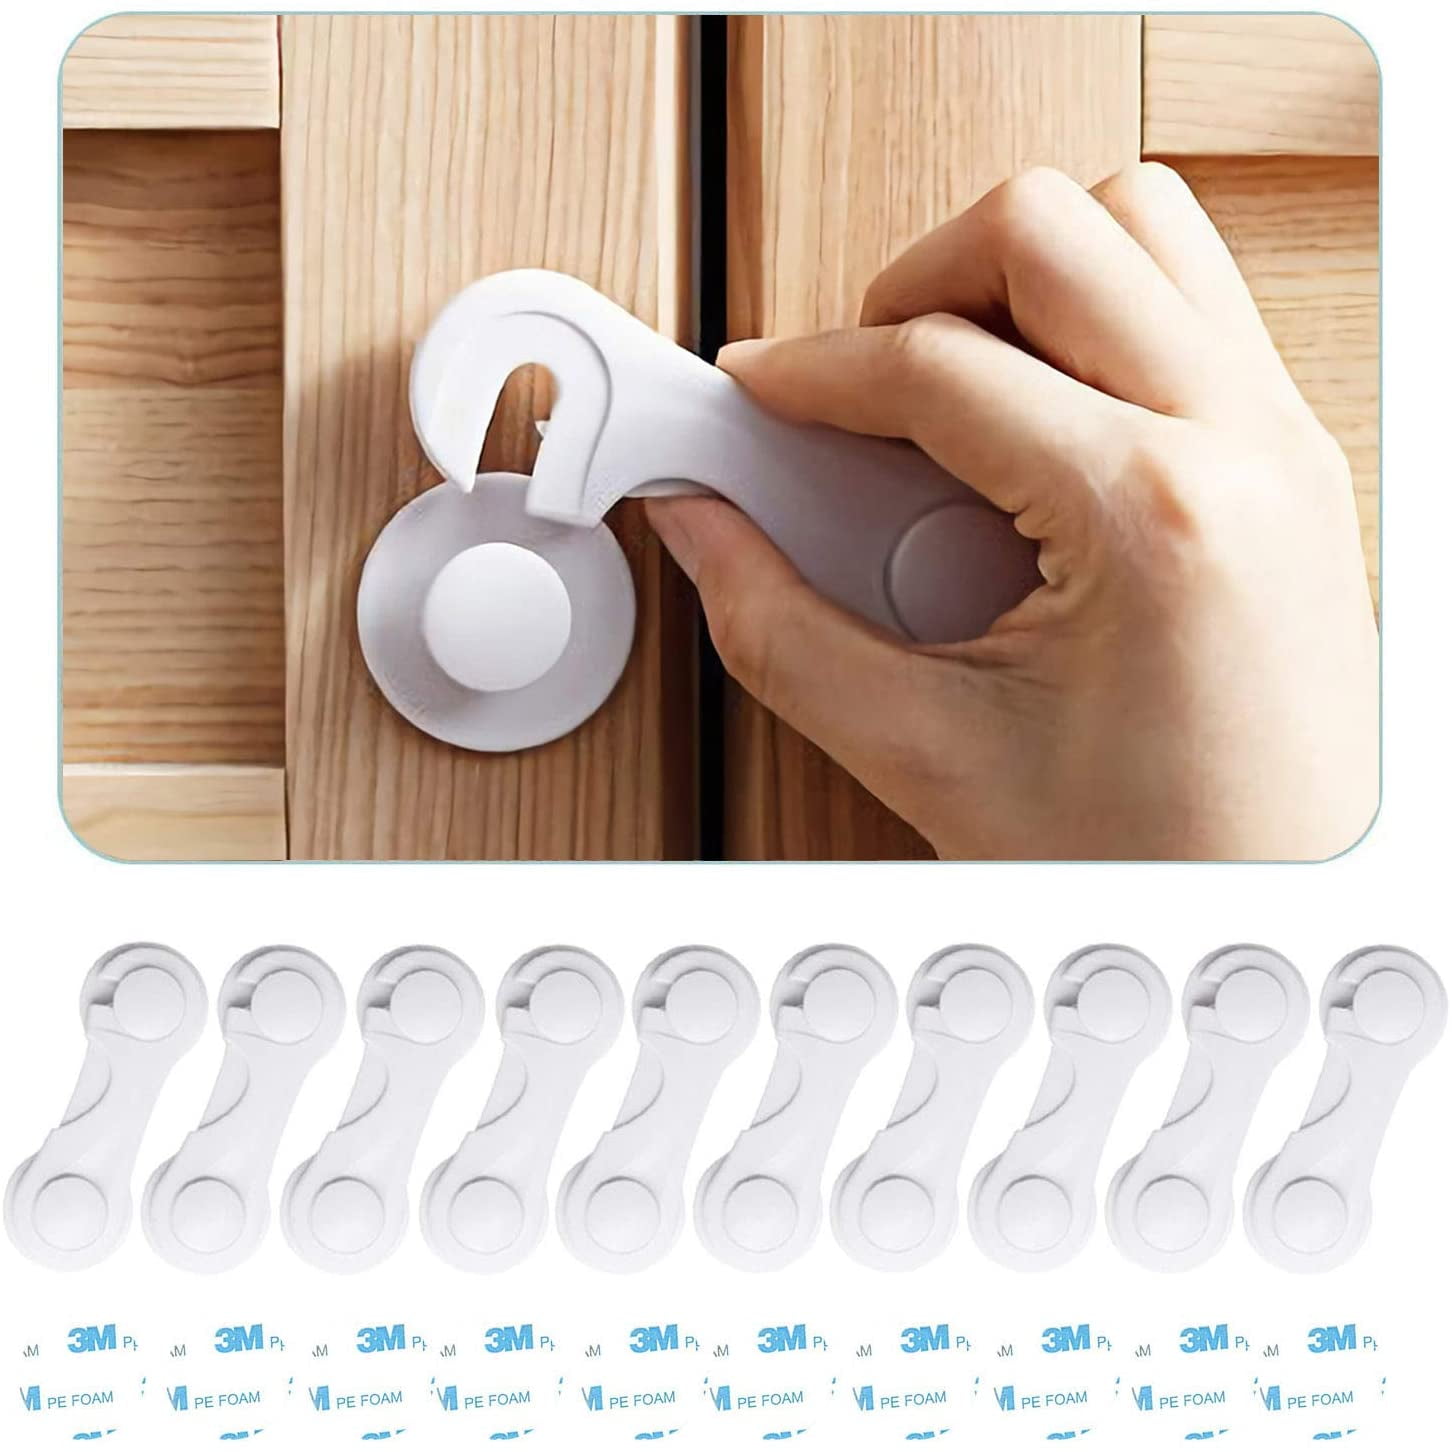 Perma Child Safety Magnetic Cabinet & Drawer Locks - 8 Pack with 1 Key